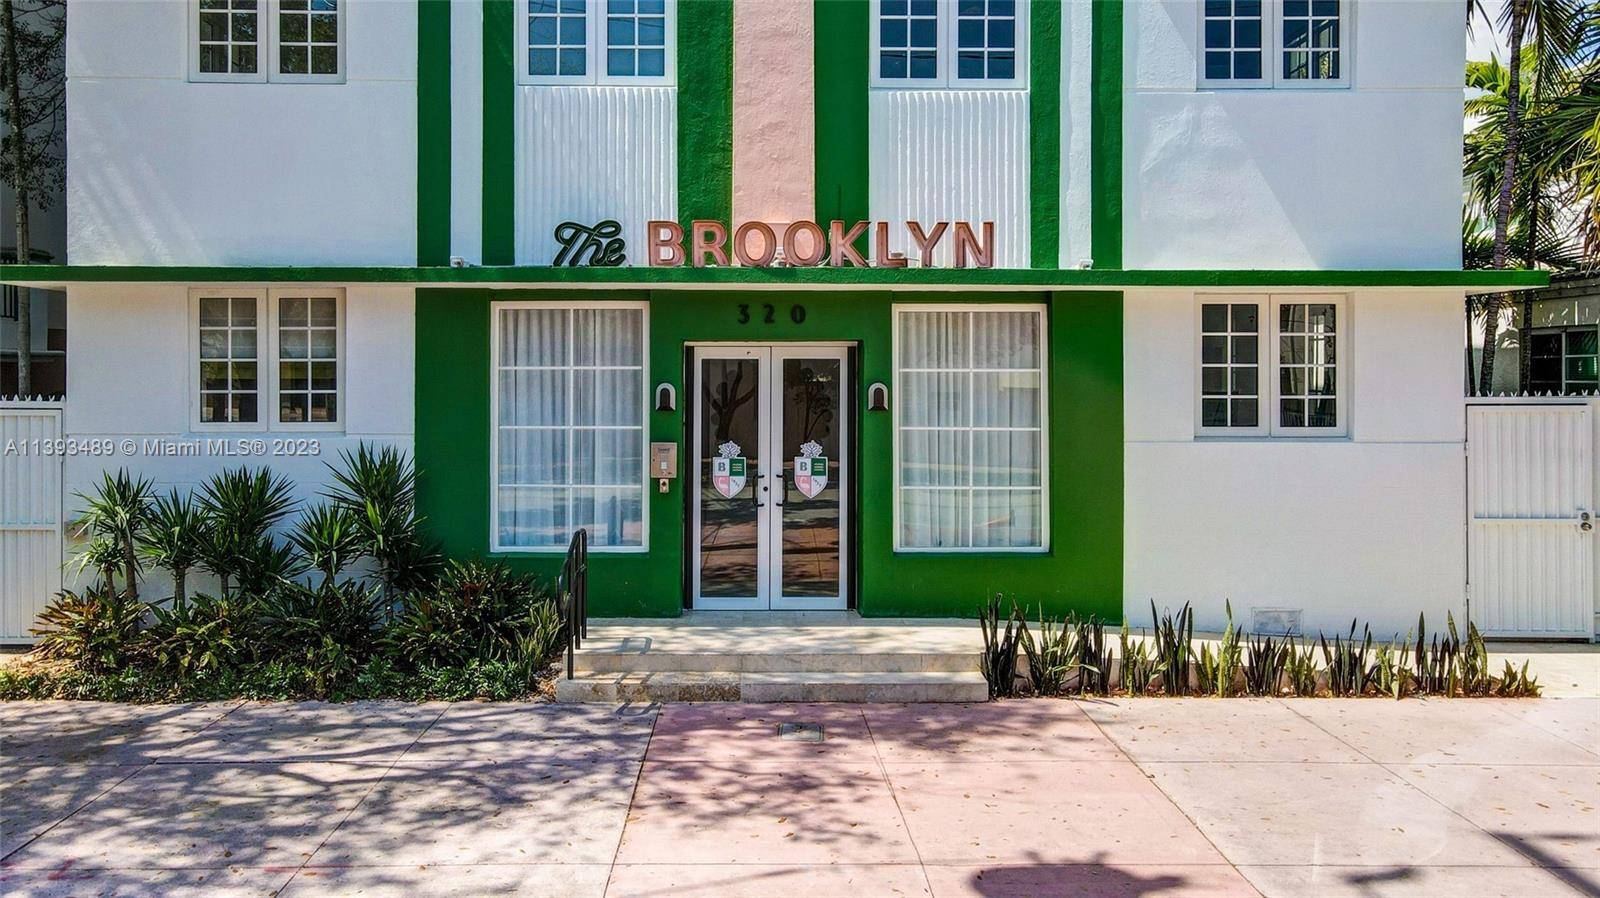 AWARD WINNING DESIGNER'S LATEST MASTERPIECE THE BROOKLYN Beautifully renovated building in prime South of Fifth.